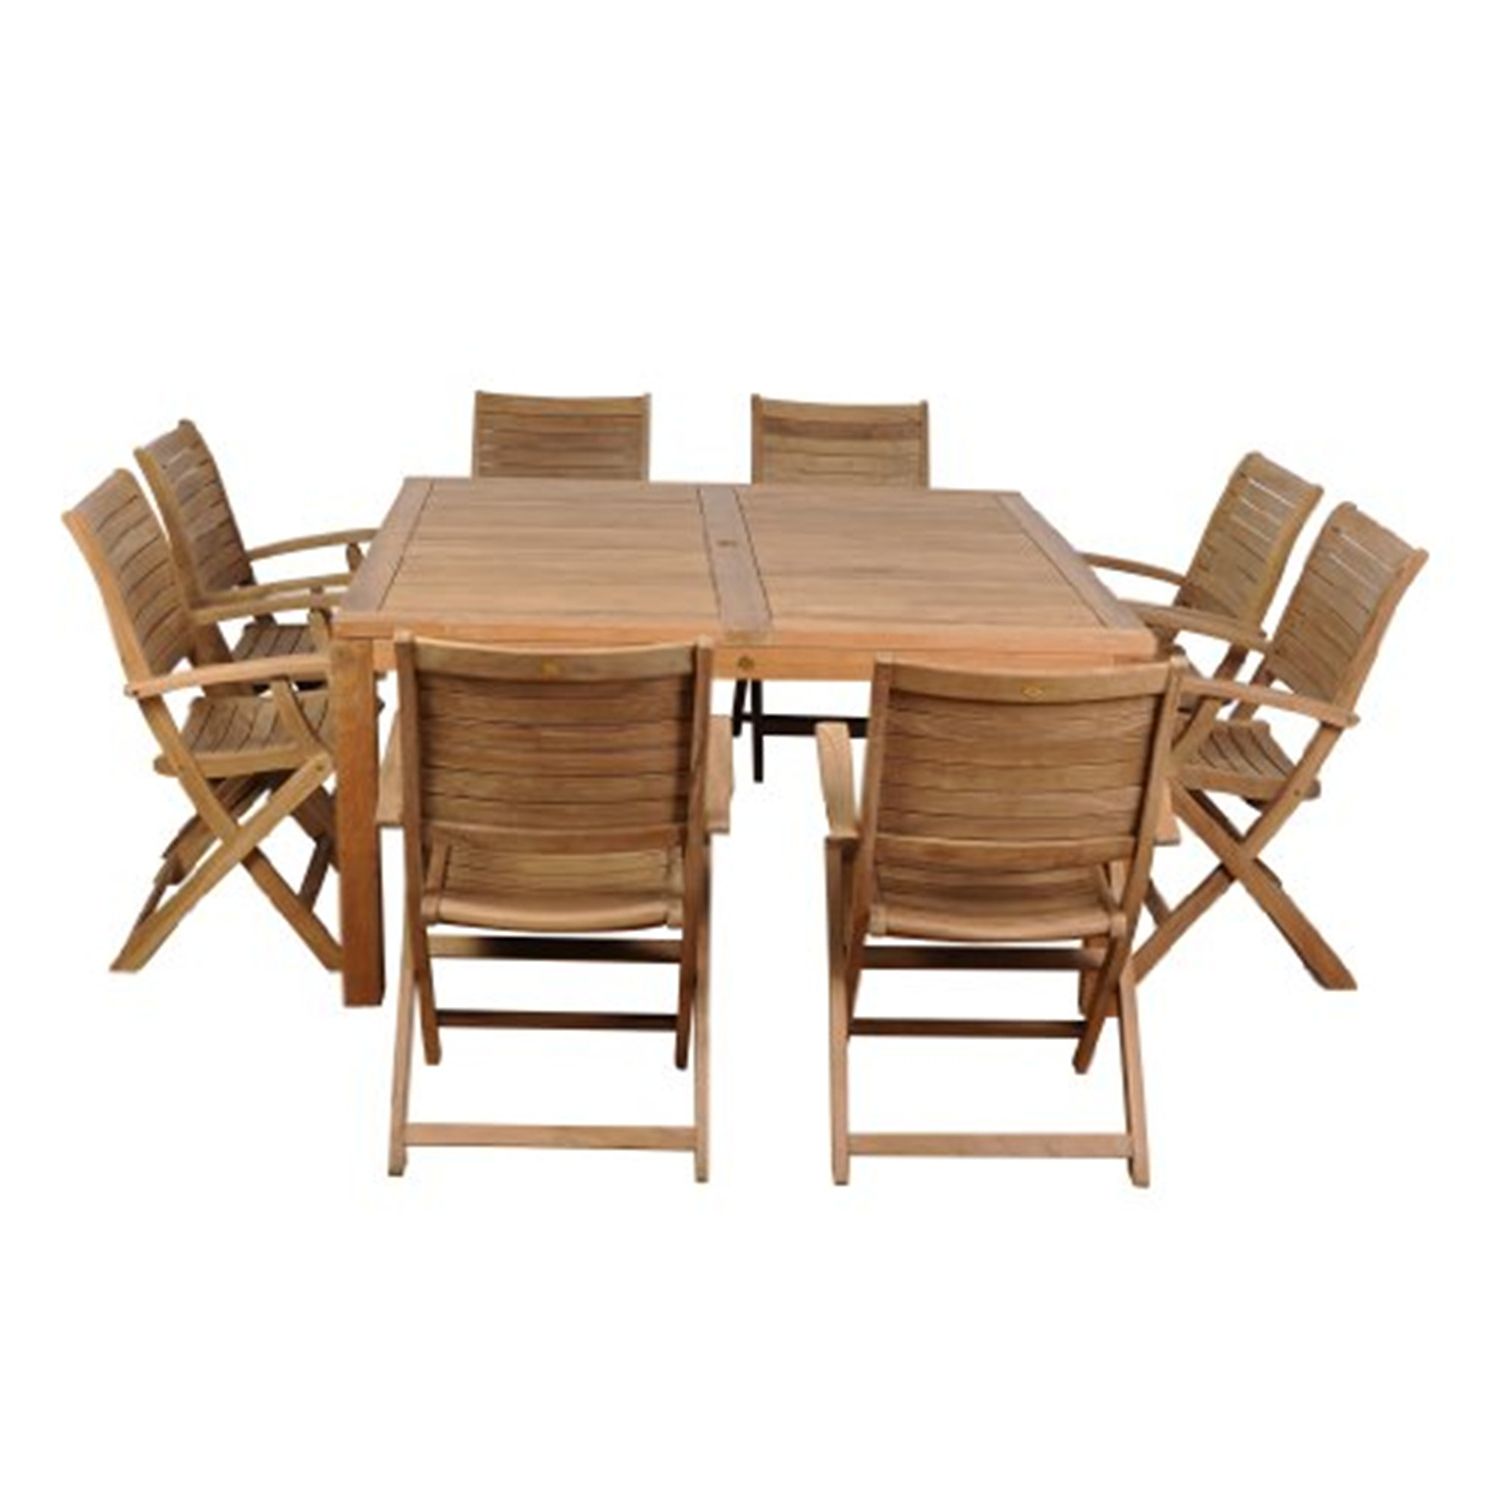 9 Piece Outdoor Square Dining Sets Within Fashionable Boynton 9 Piece Teak Square Patio Dining Set – Walmart – Walmart (View 3 of 15)